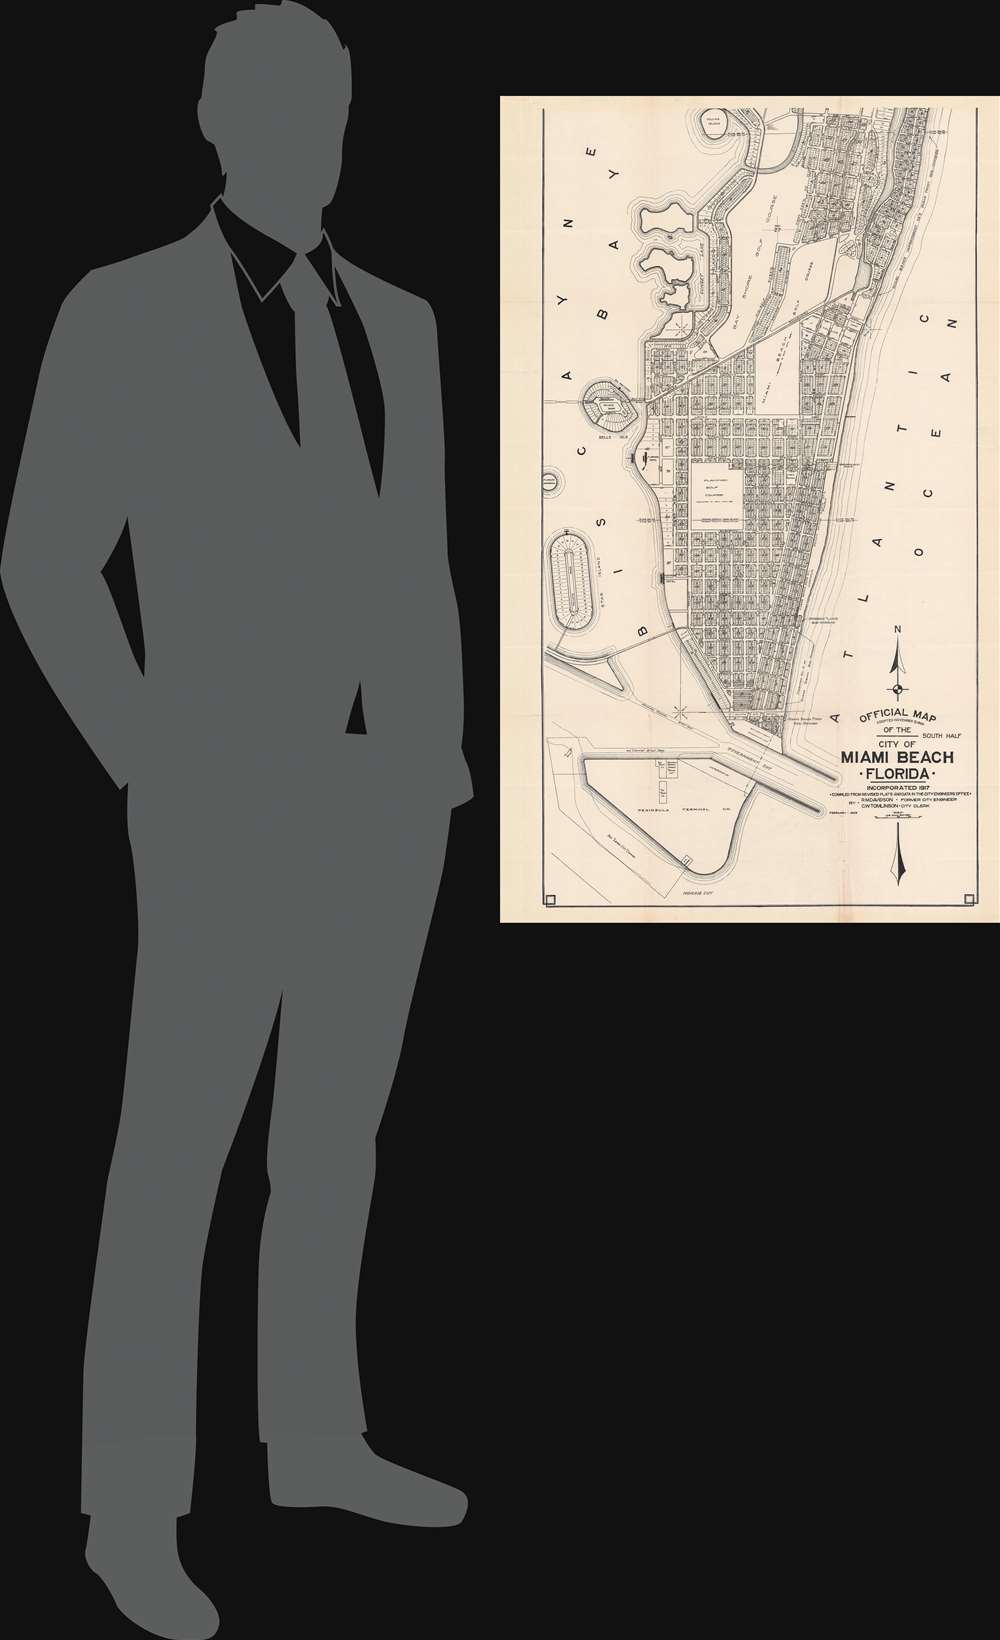 Official Map Adopted November 3, 1920 of the city of Miami Beach Florida. - Alternate View 1